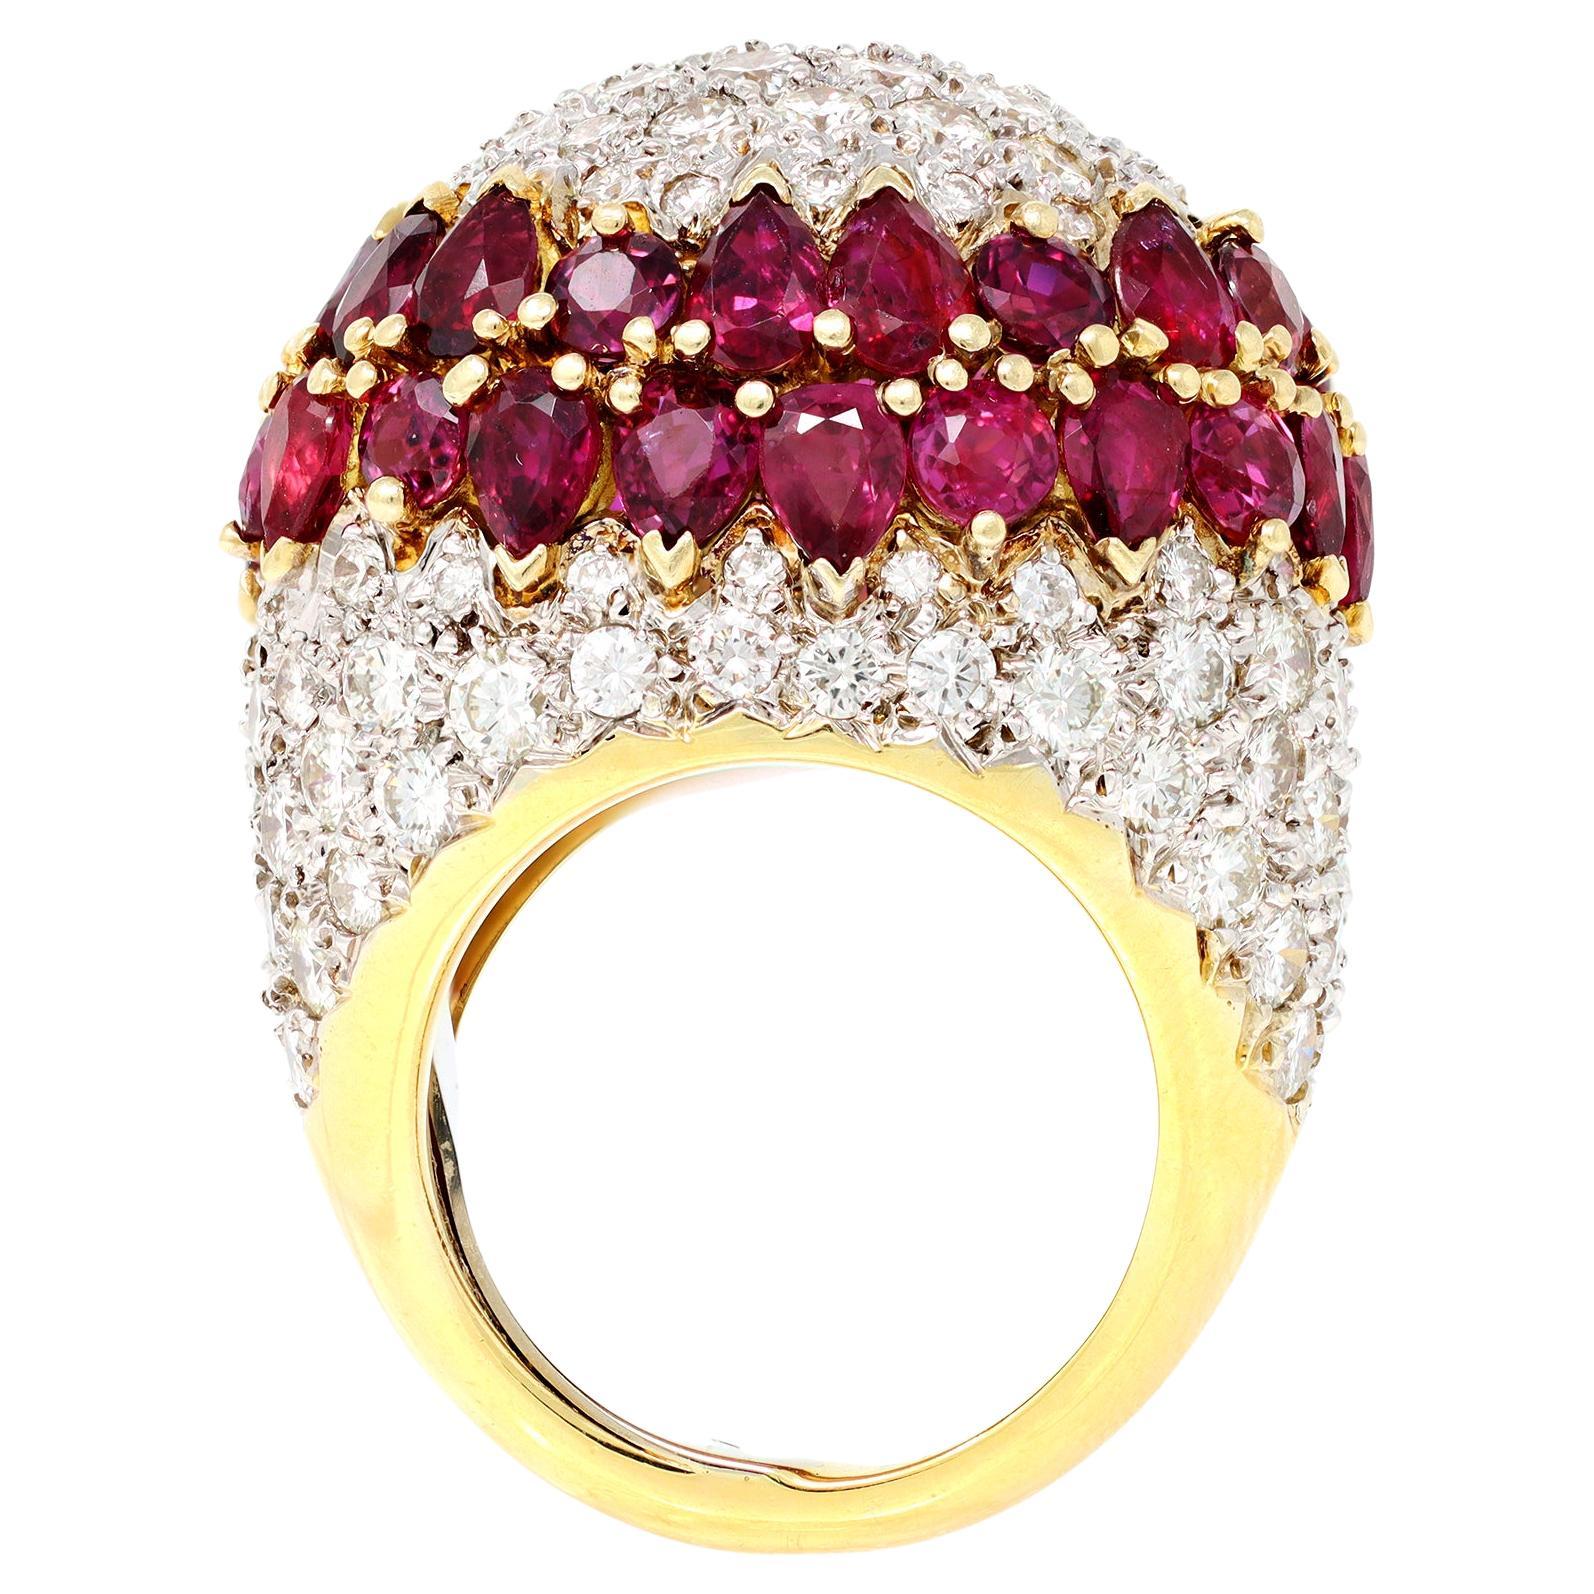 An important dome ring Circa 1970 featuring pave diamonds set in a honeycomb fashion. The dome is separated by a double row of mix cut rubies, with matched color. The ring is set in 18 karat yellow gold and has a guard inside the shank allowing for